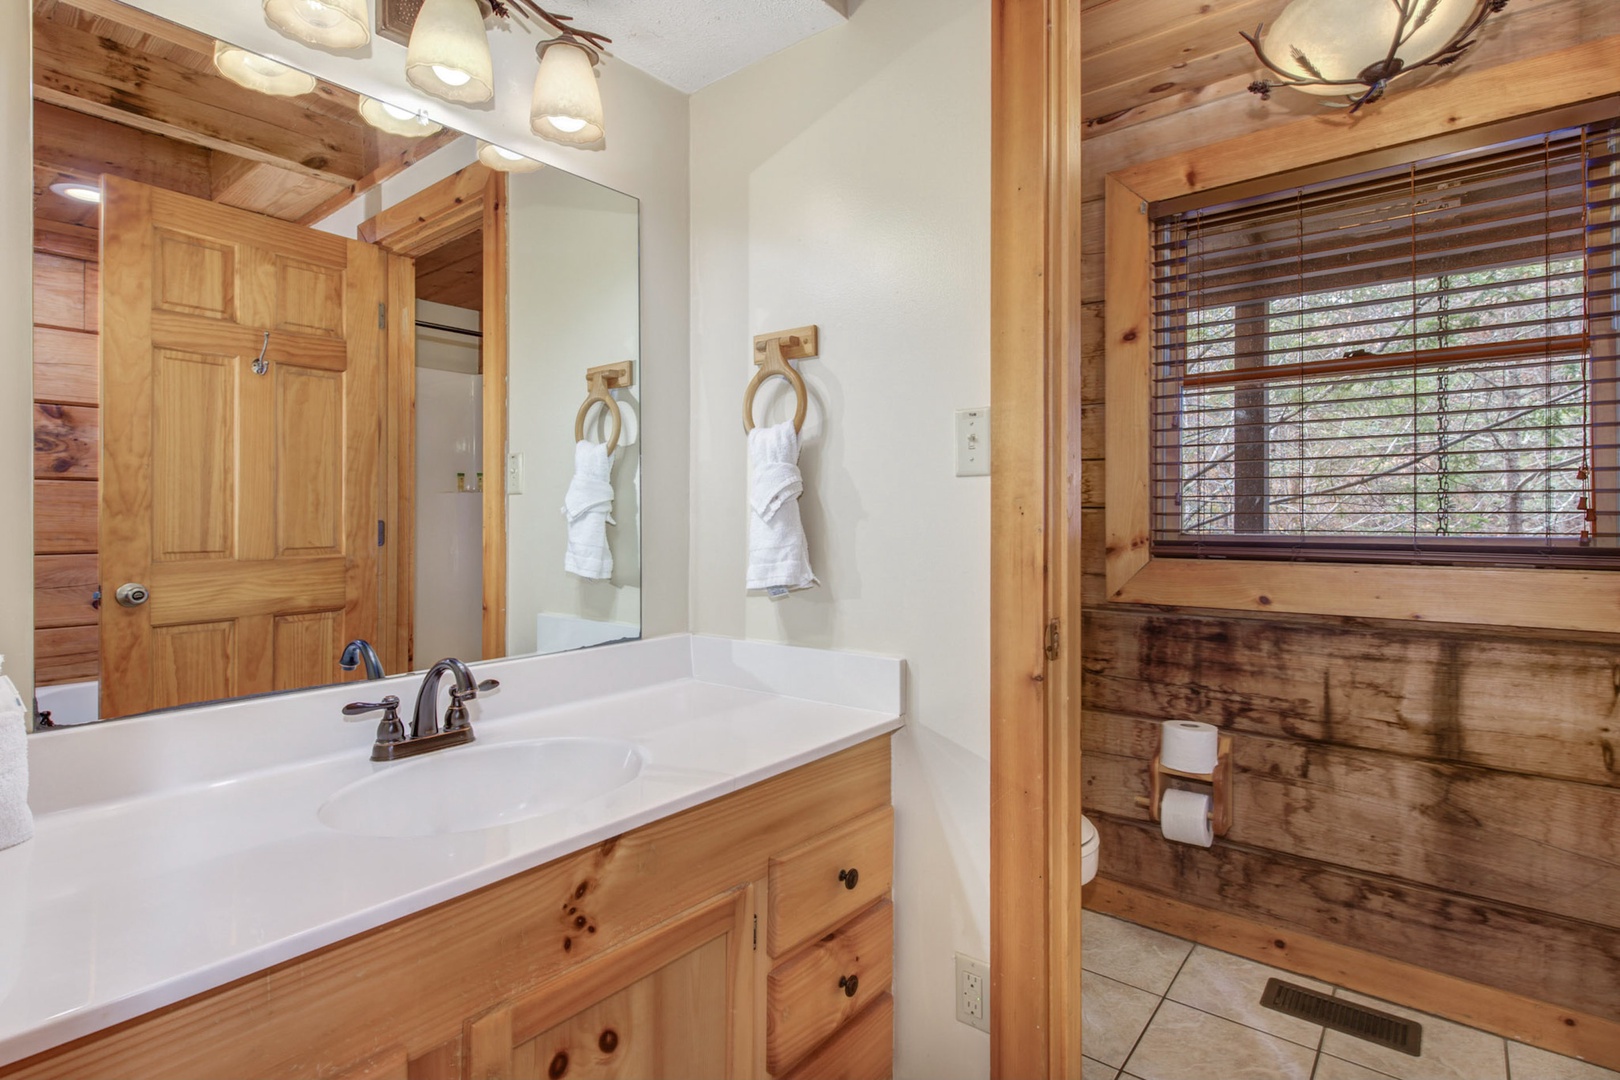 The ensuite off the primary suite includes a large single vanity & shower